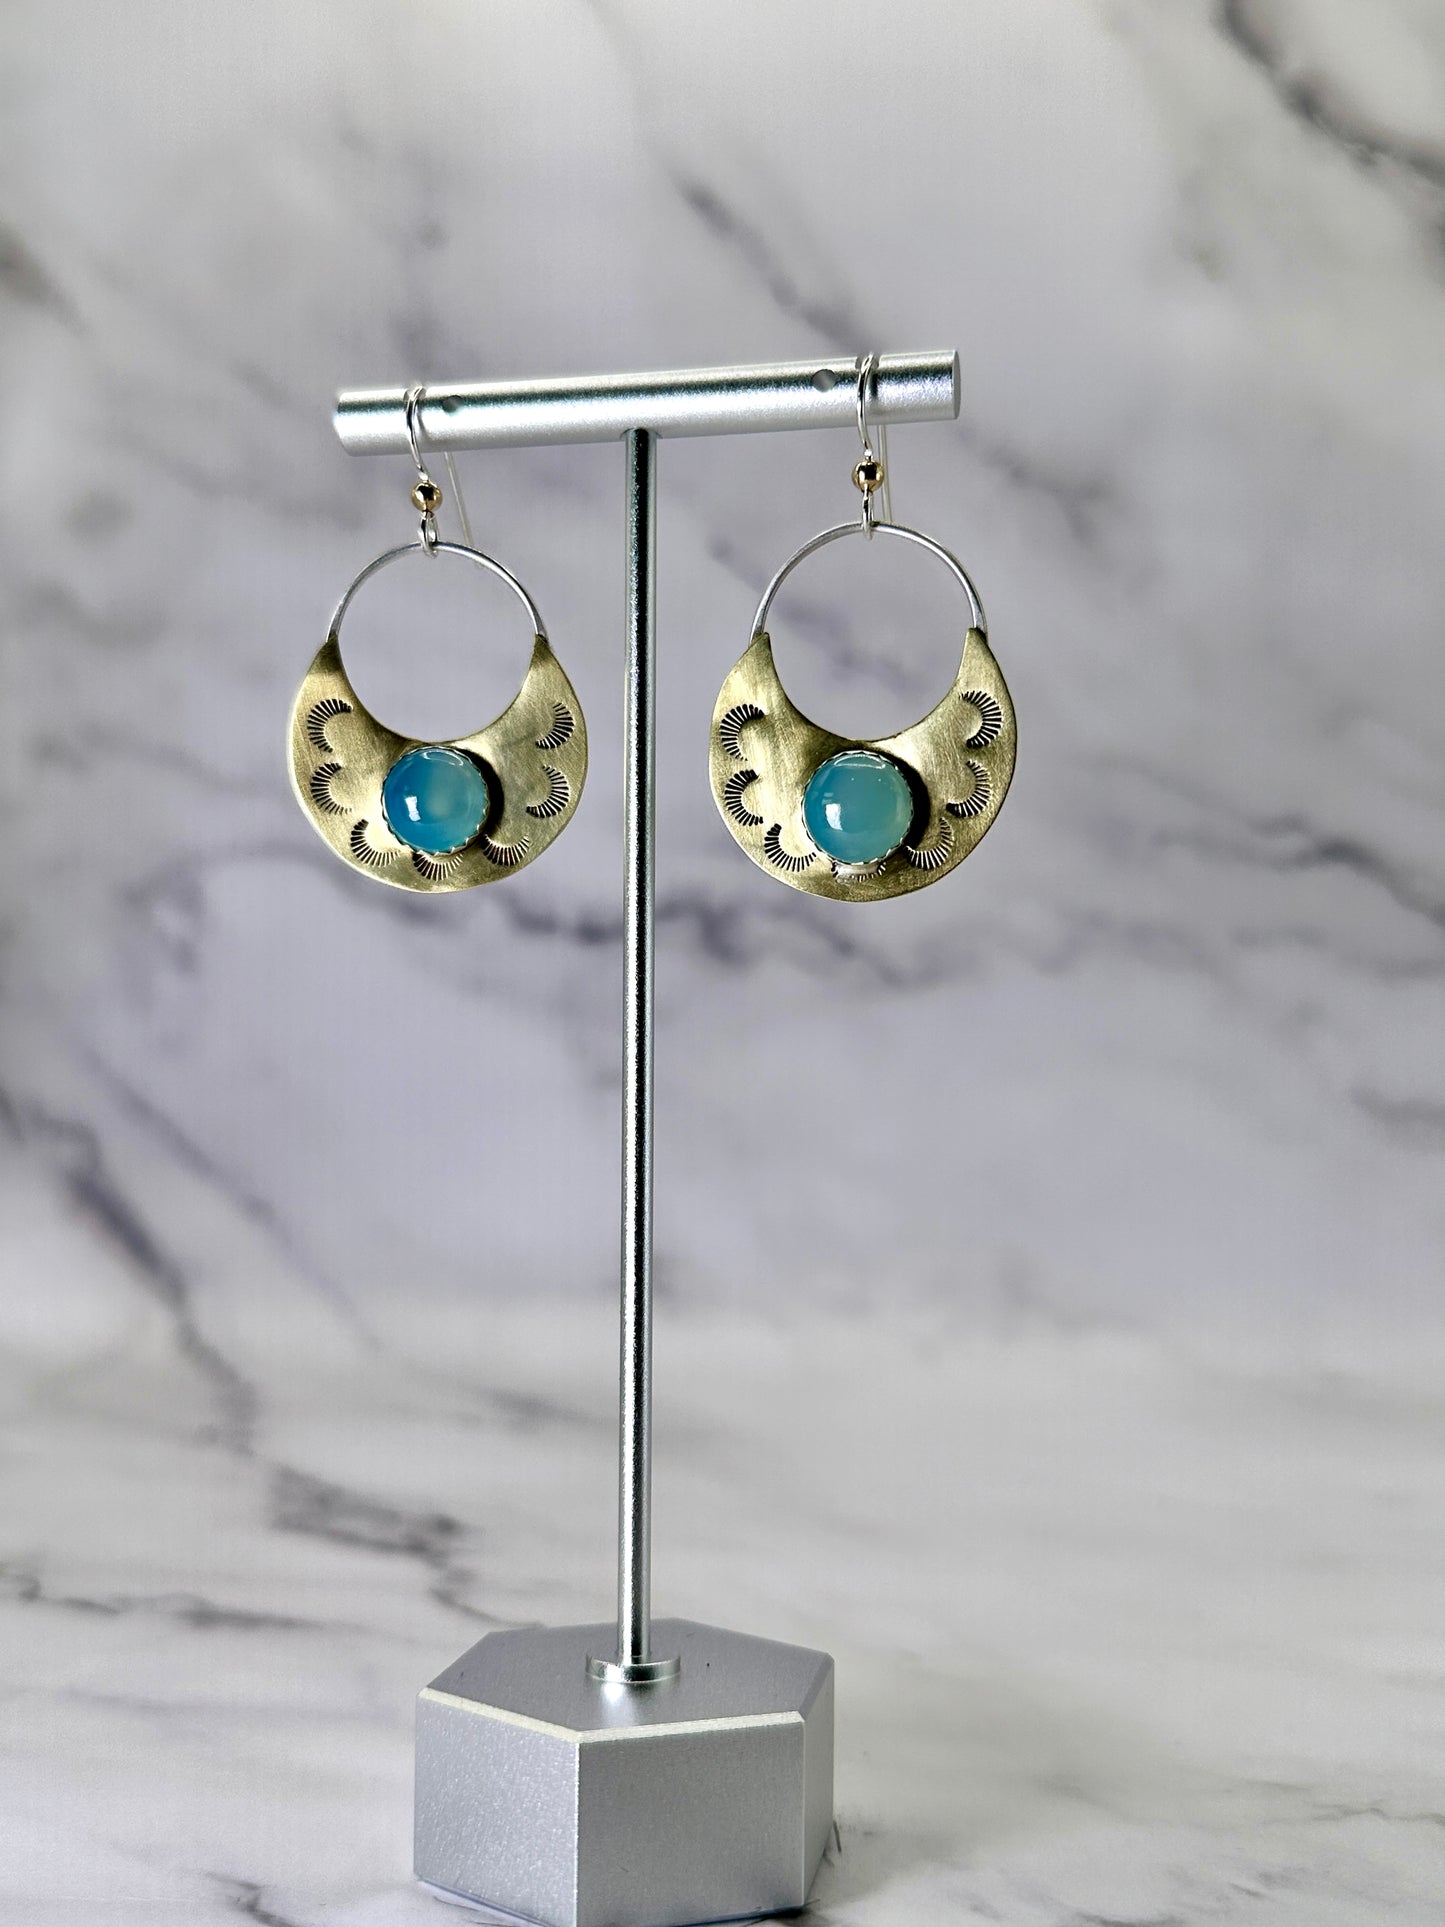 Brass & Copper Hanging Earrings with Gemstones